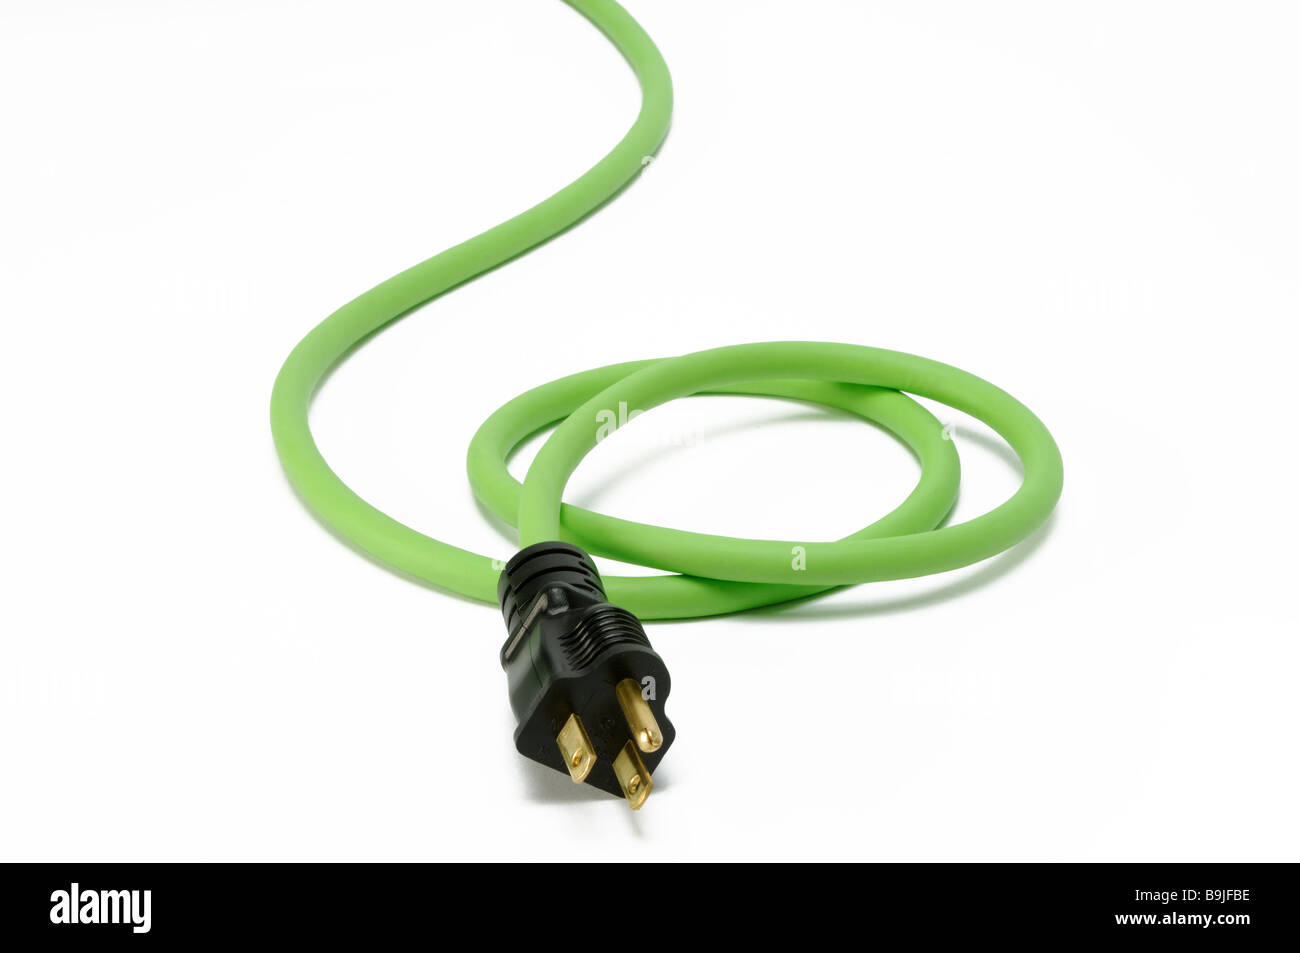 The end plug section of a green electrical extension power cord with one plug Stock Photo